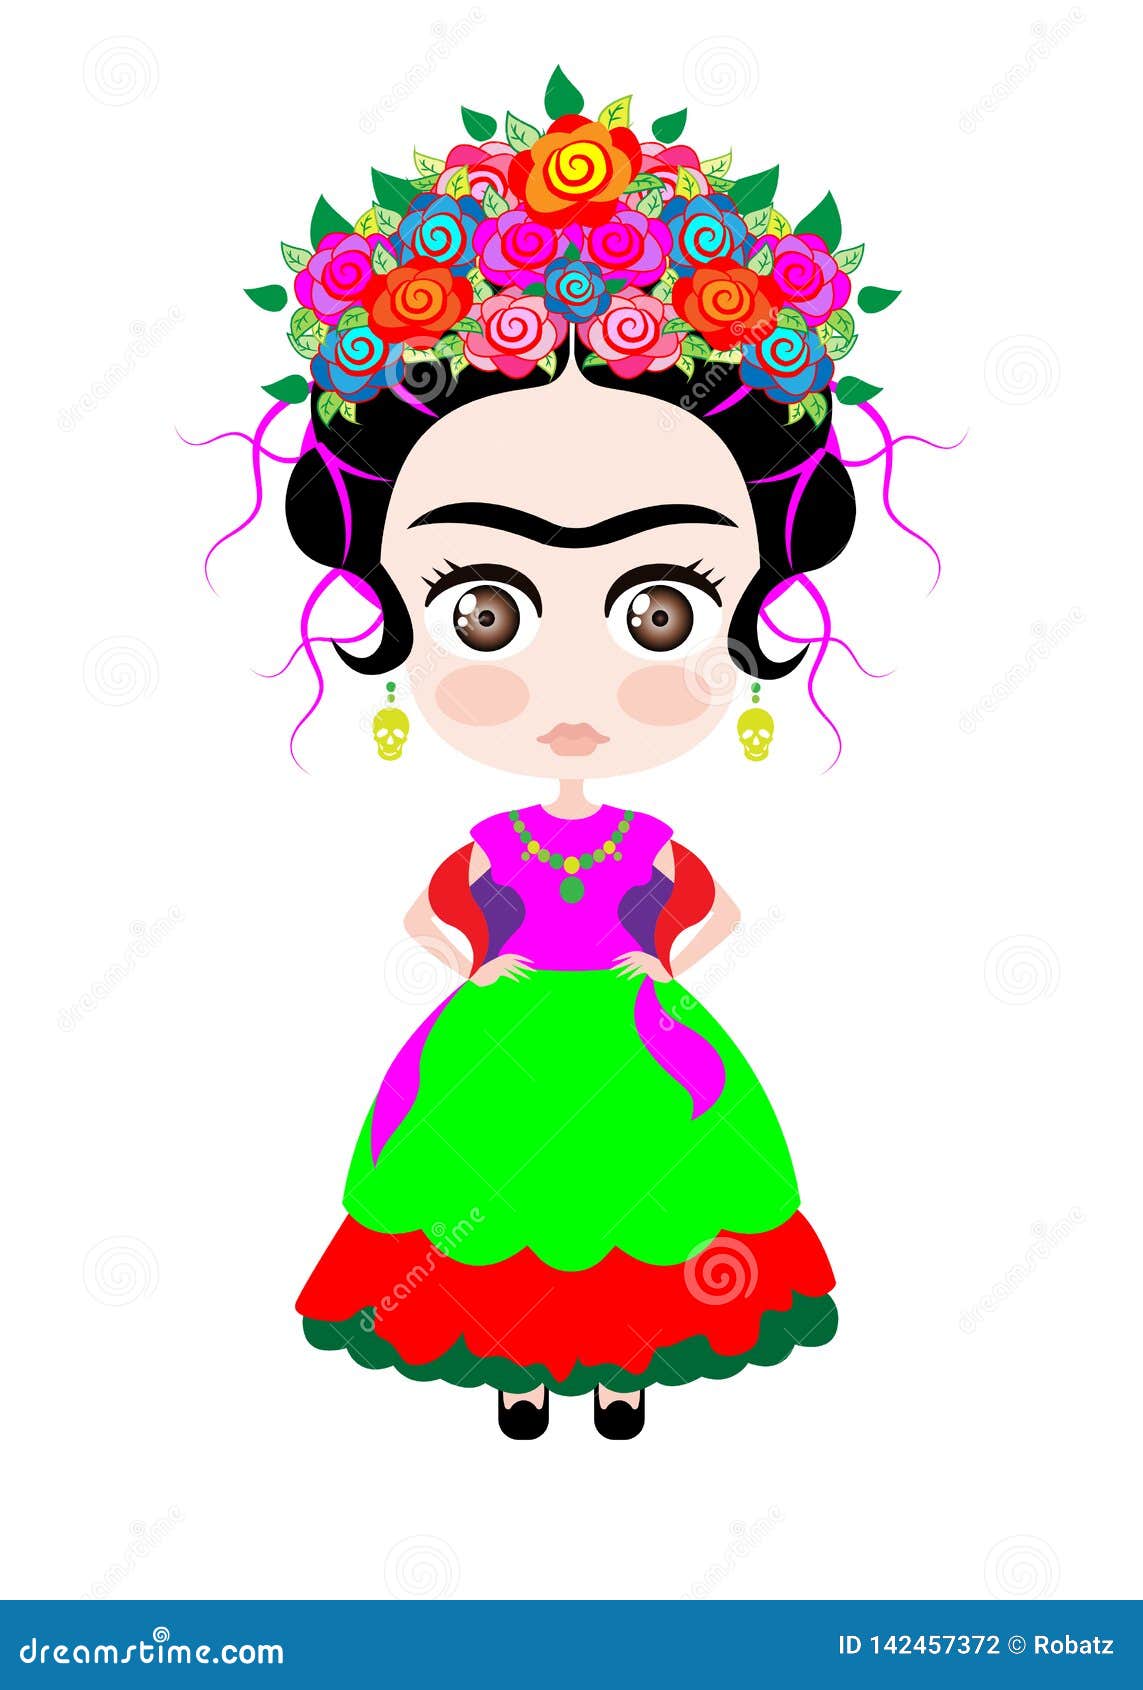 baby frida kahlo with crown of colorful flowers, kokeshi doll style, cartoon doll in typical ethnic mexican clothes for children,